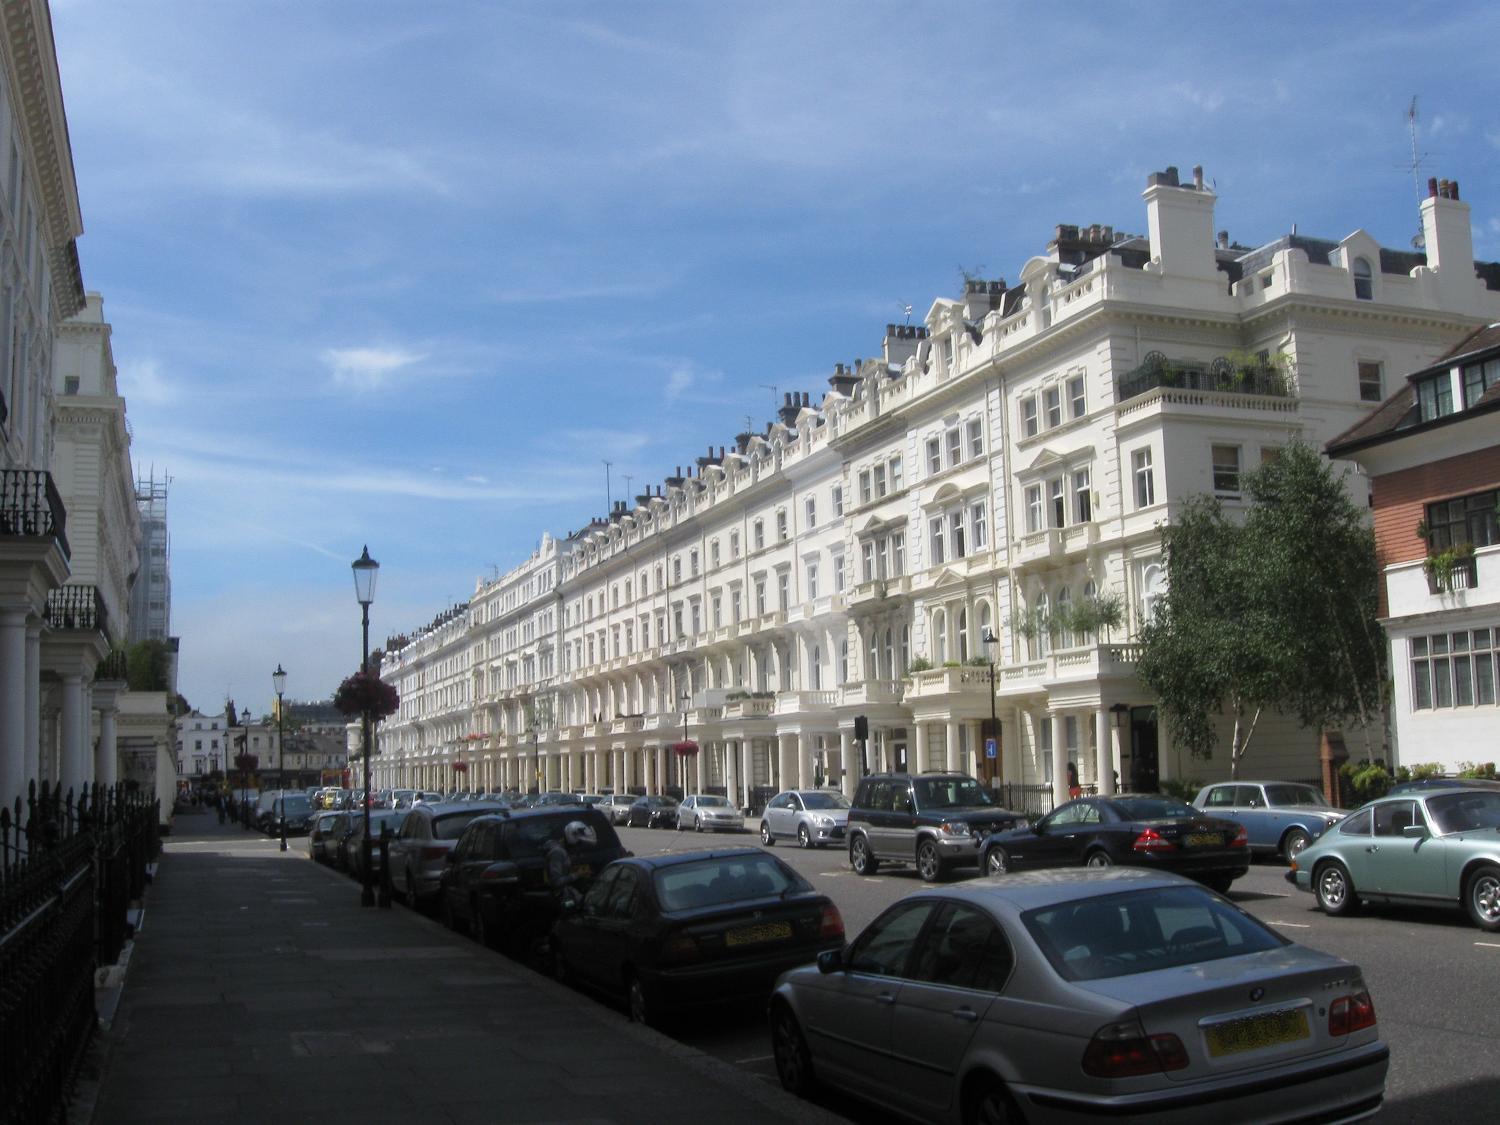 Queens Gate Terrace in London | Factbook Pictures | Geography im